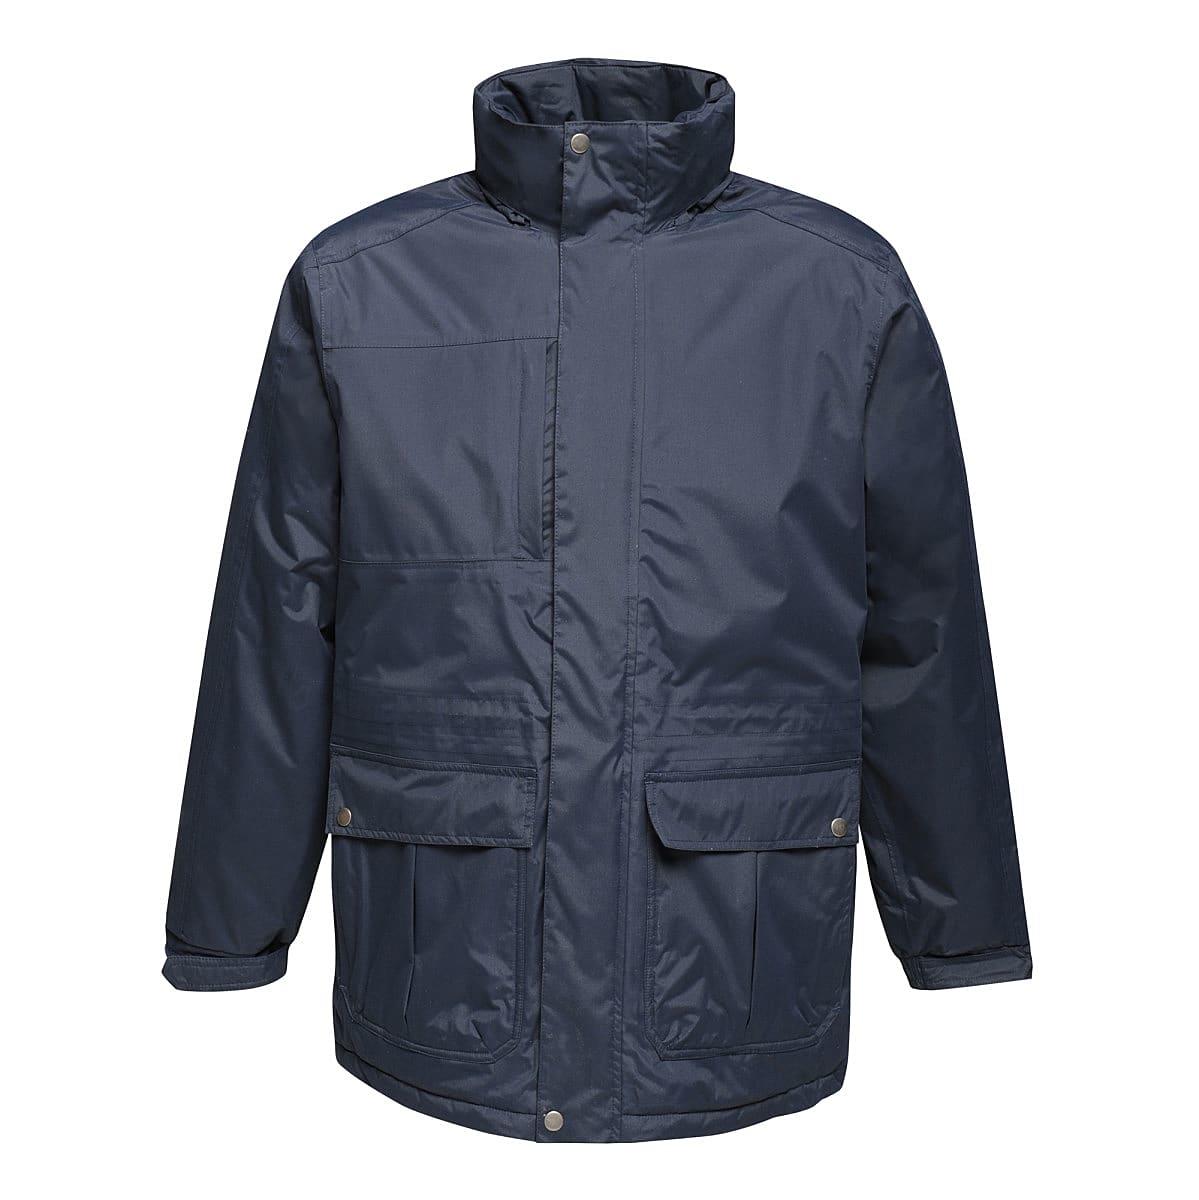 Regatta Mens Darby III Insulated Jacket in Navy Blue (Product Code: TRA203)